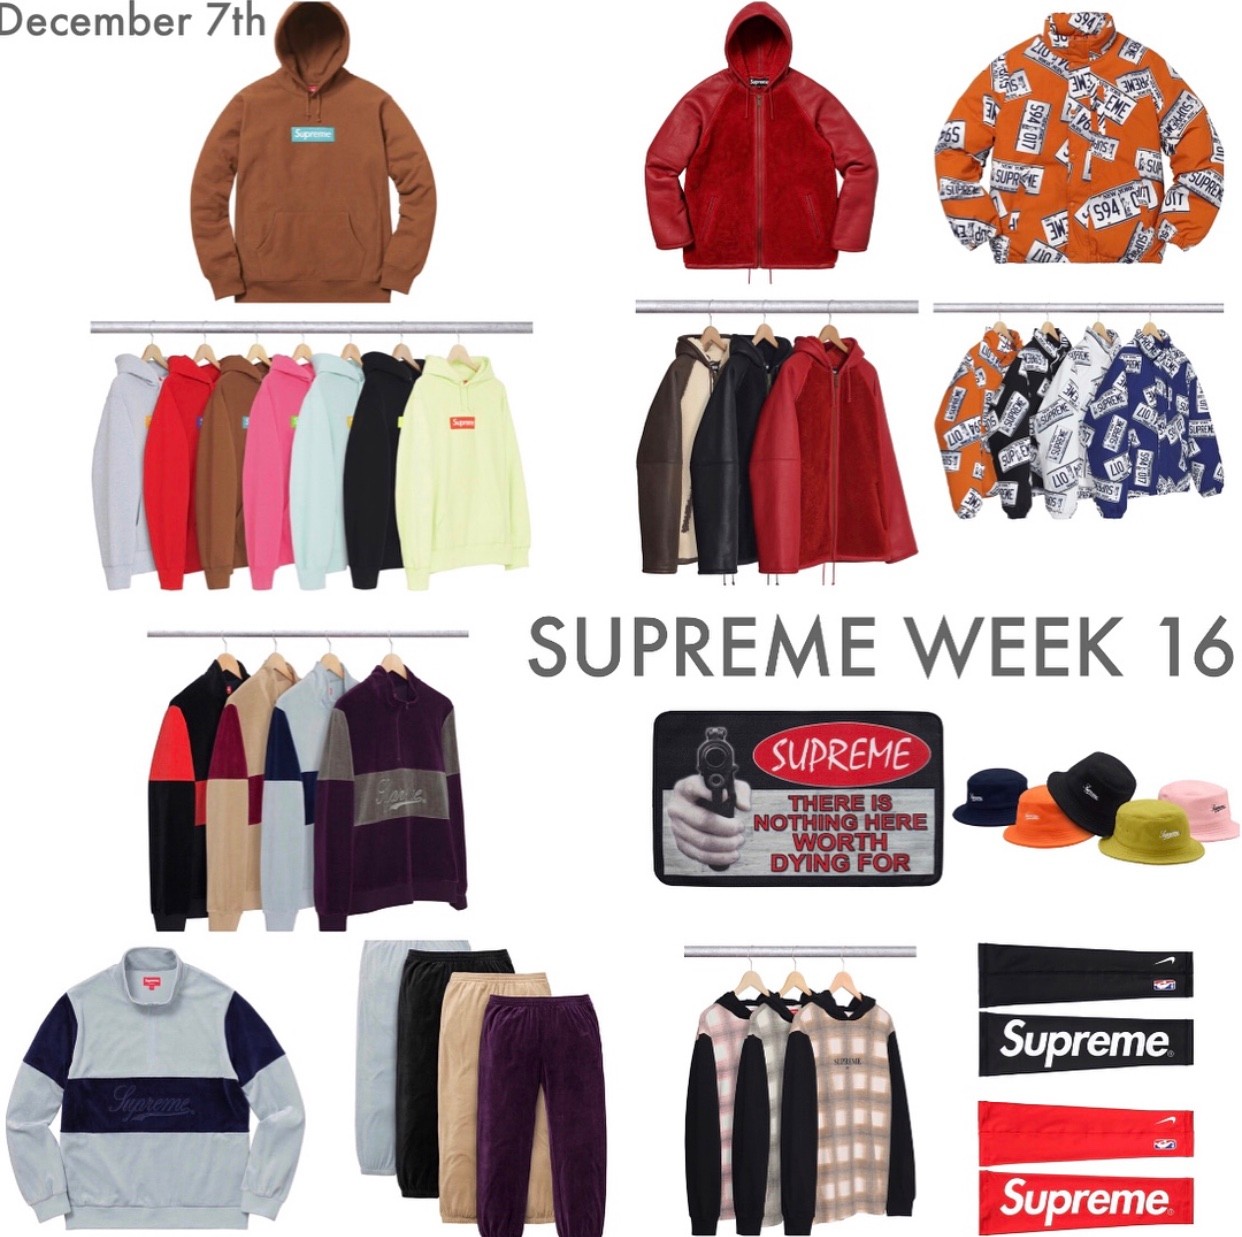 Supreme has finally secured its trademark in China after six years